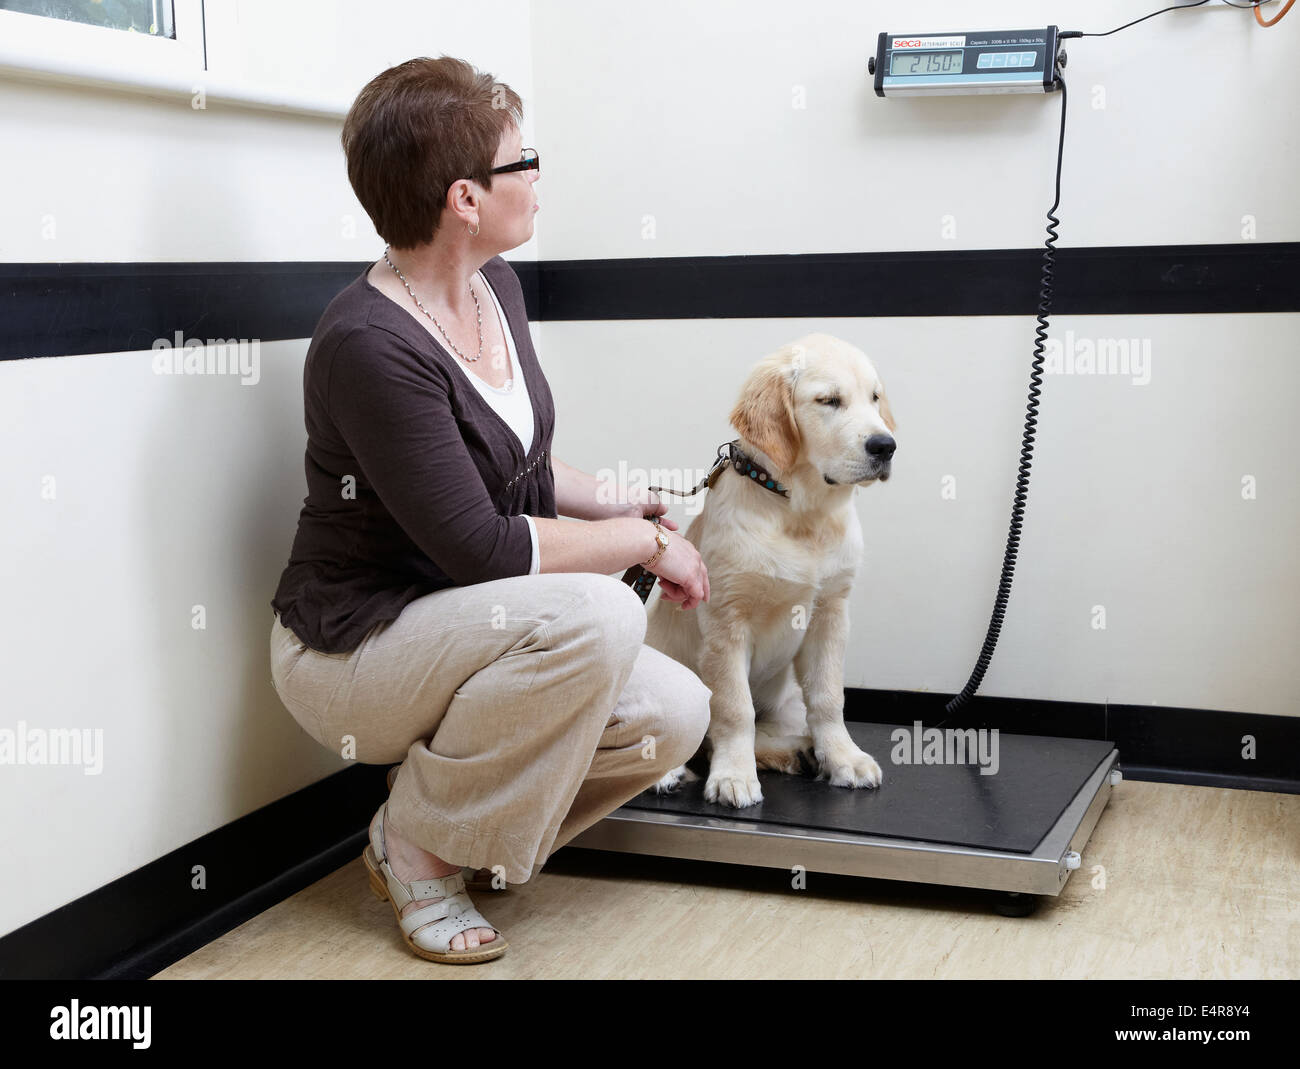 Labrador puppy being weighed at veterinary surgery Stock Photo